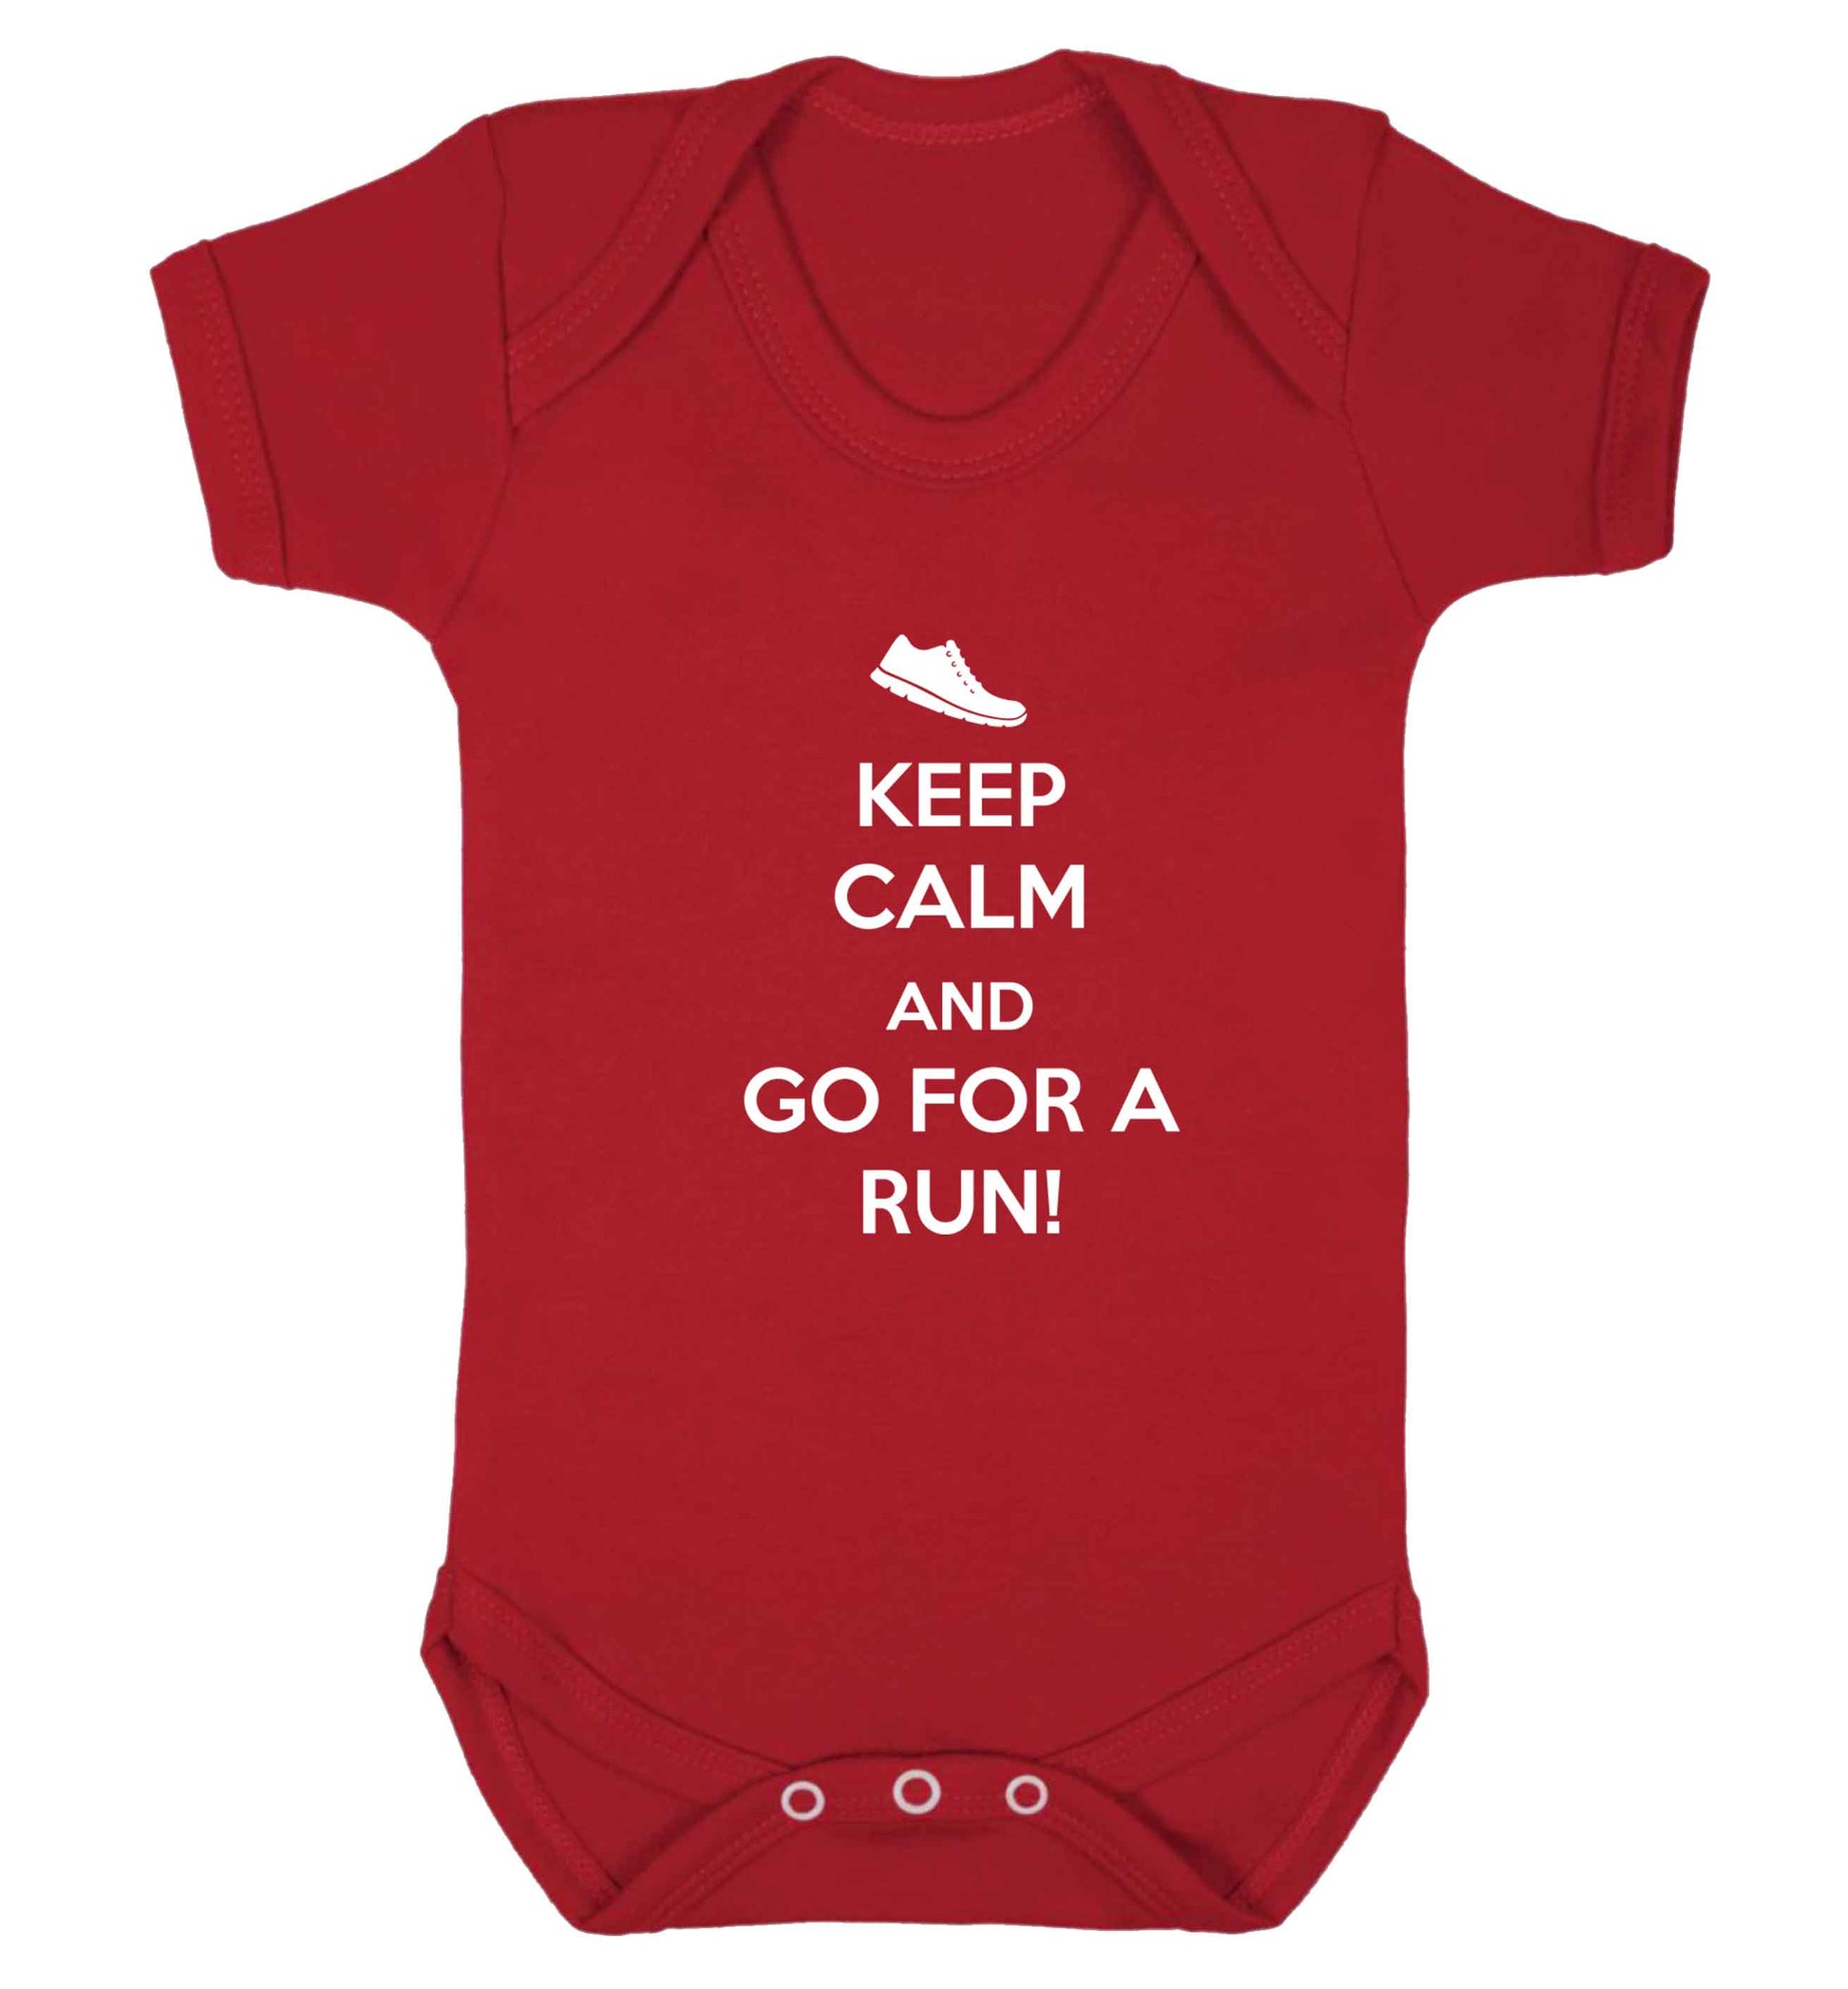 Keep calm and go for a run baby vest red 18-24 months